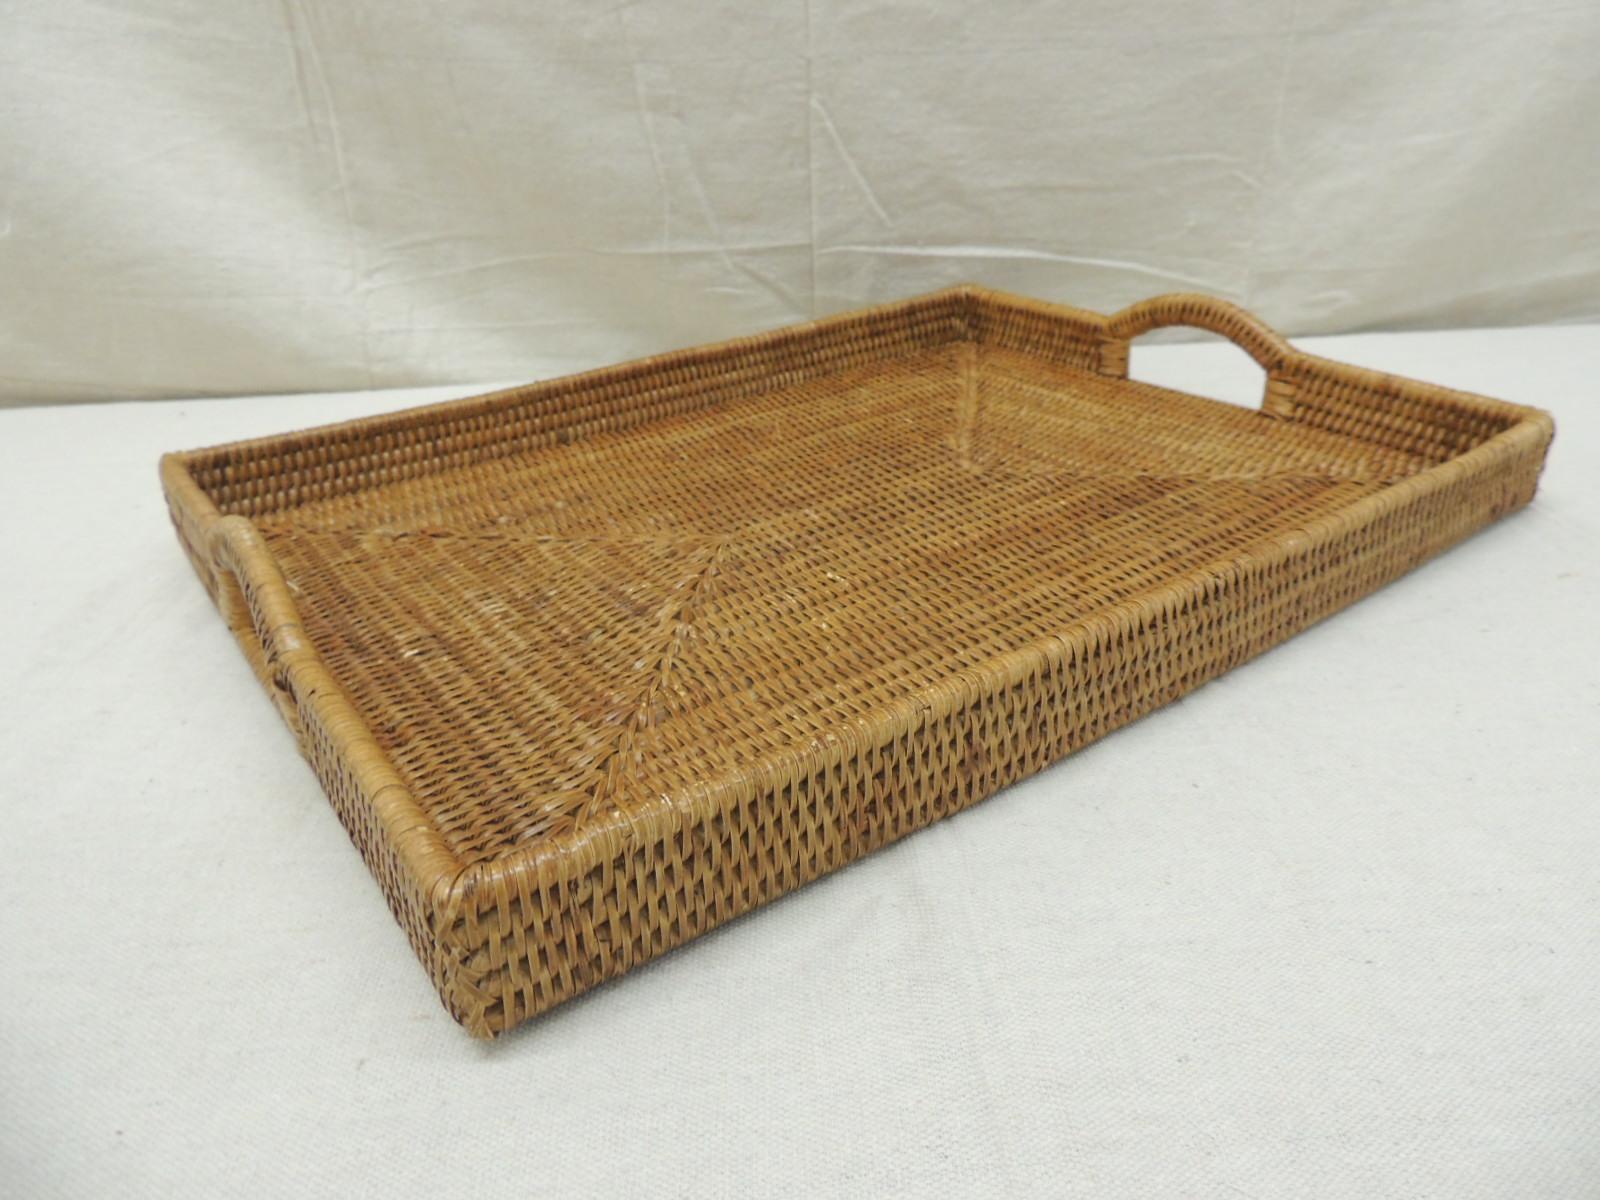 Large woven rattan serving tray with handles
Measures: 19” W x 14.5” D x 2.5” H.
  